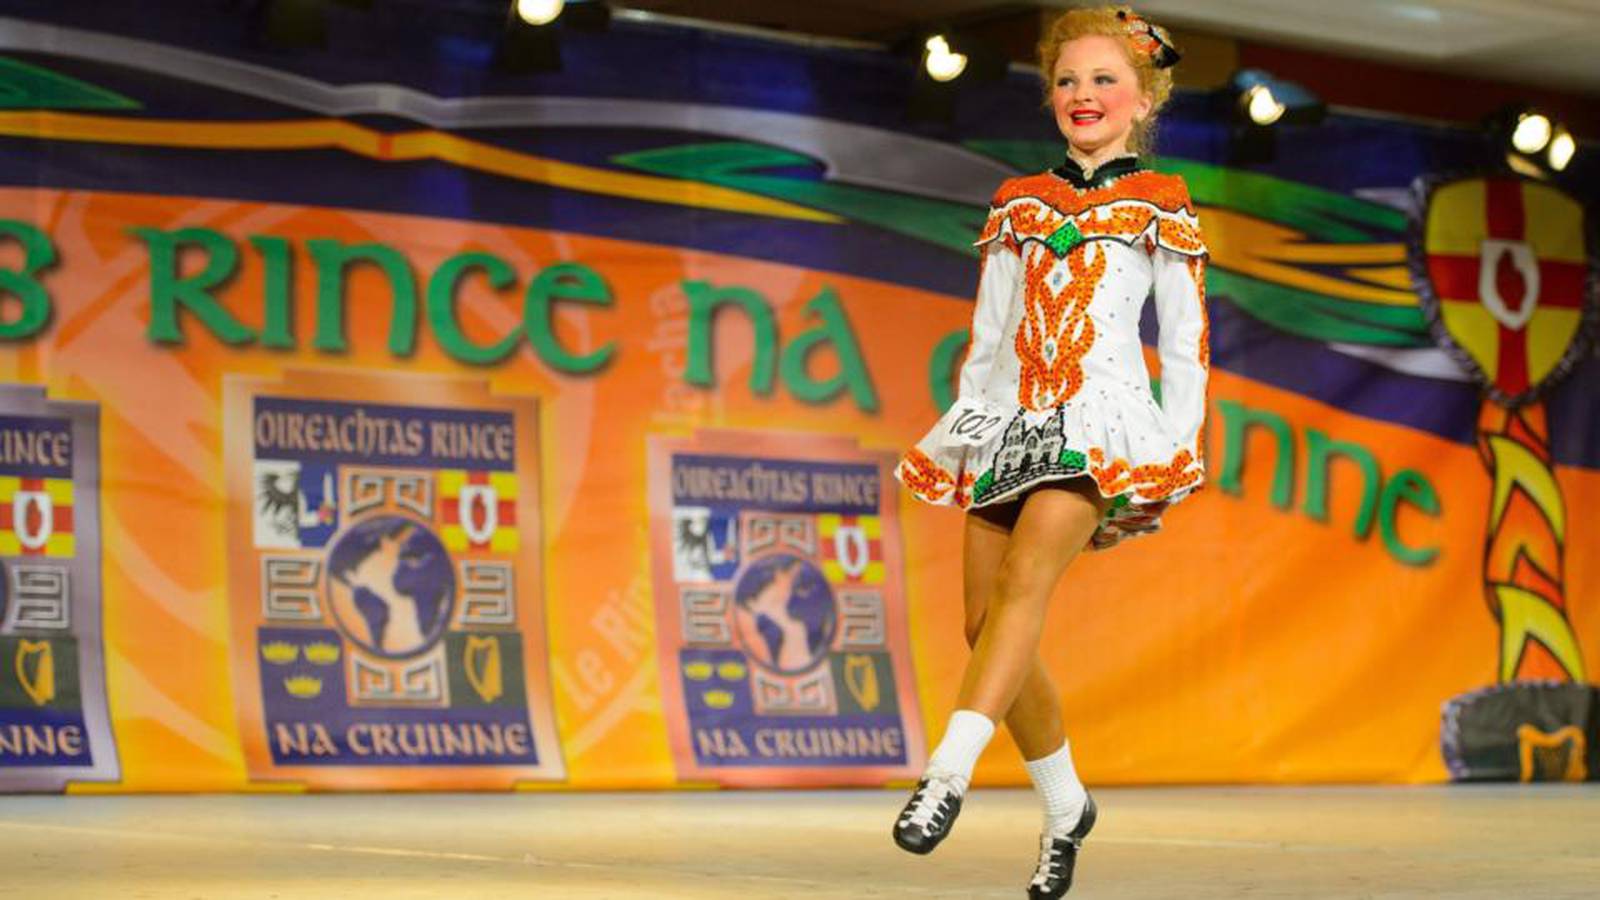 New step for Irish dancing with contest taking to London stage The